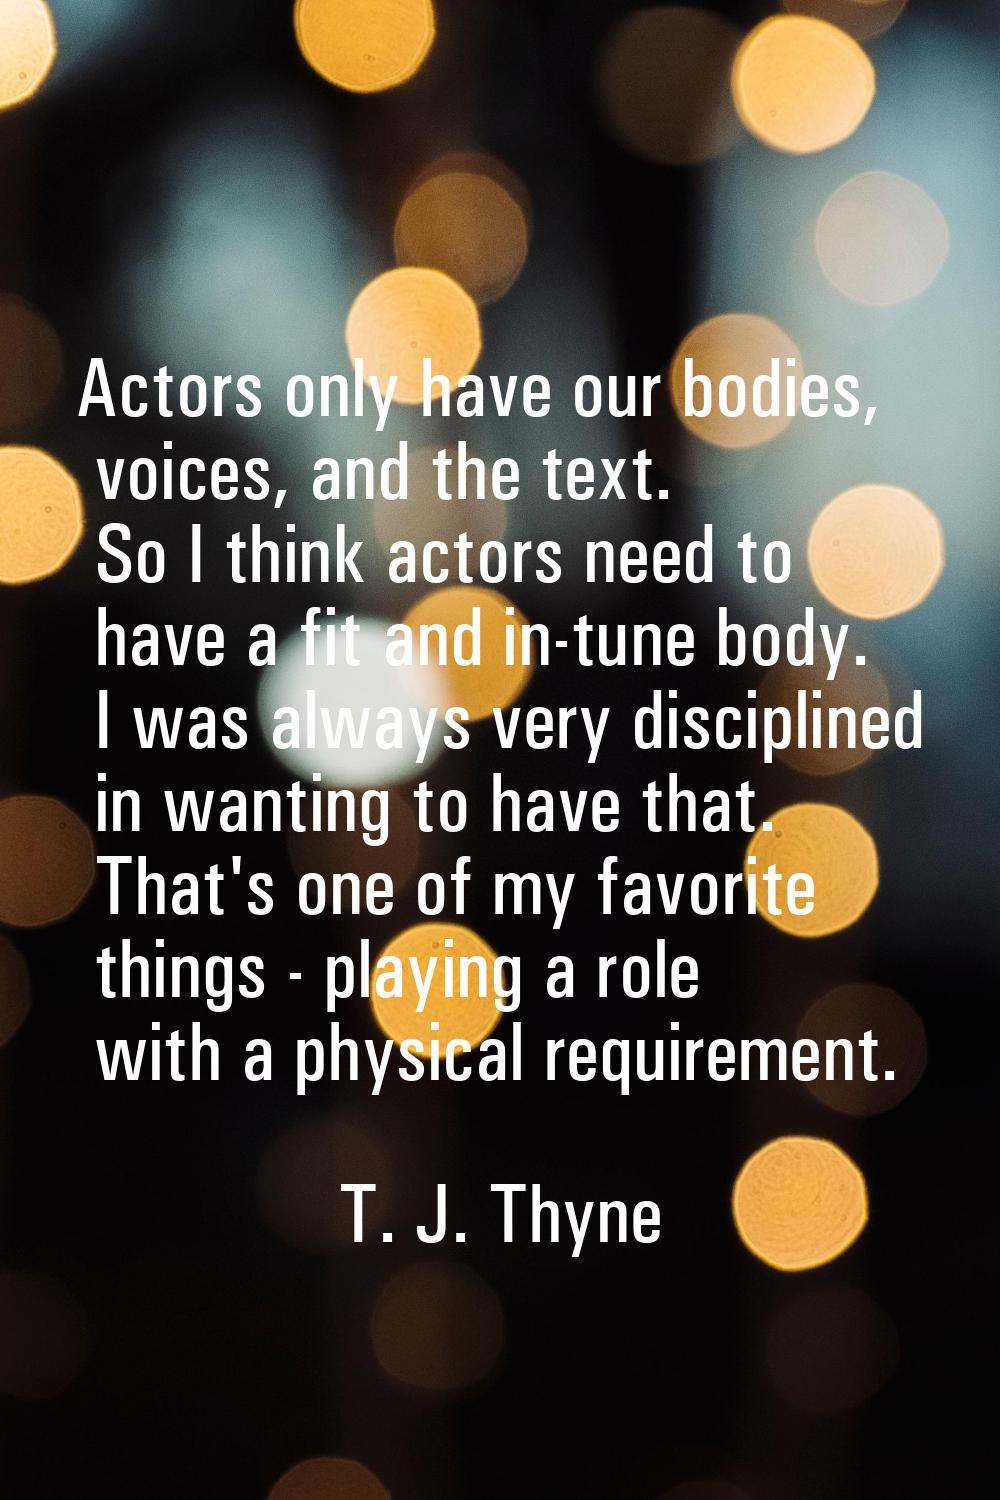 Actors only have our bodies, voices, and the text. So I think actors need to have a fit and in-tune